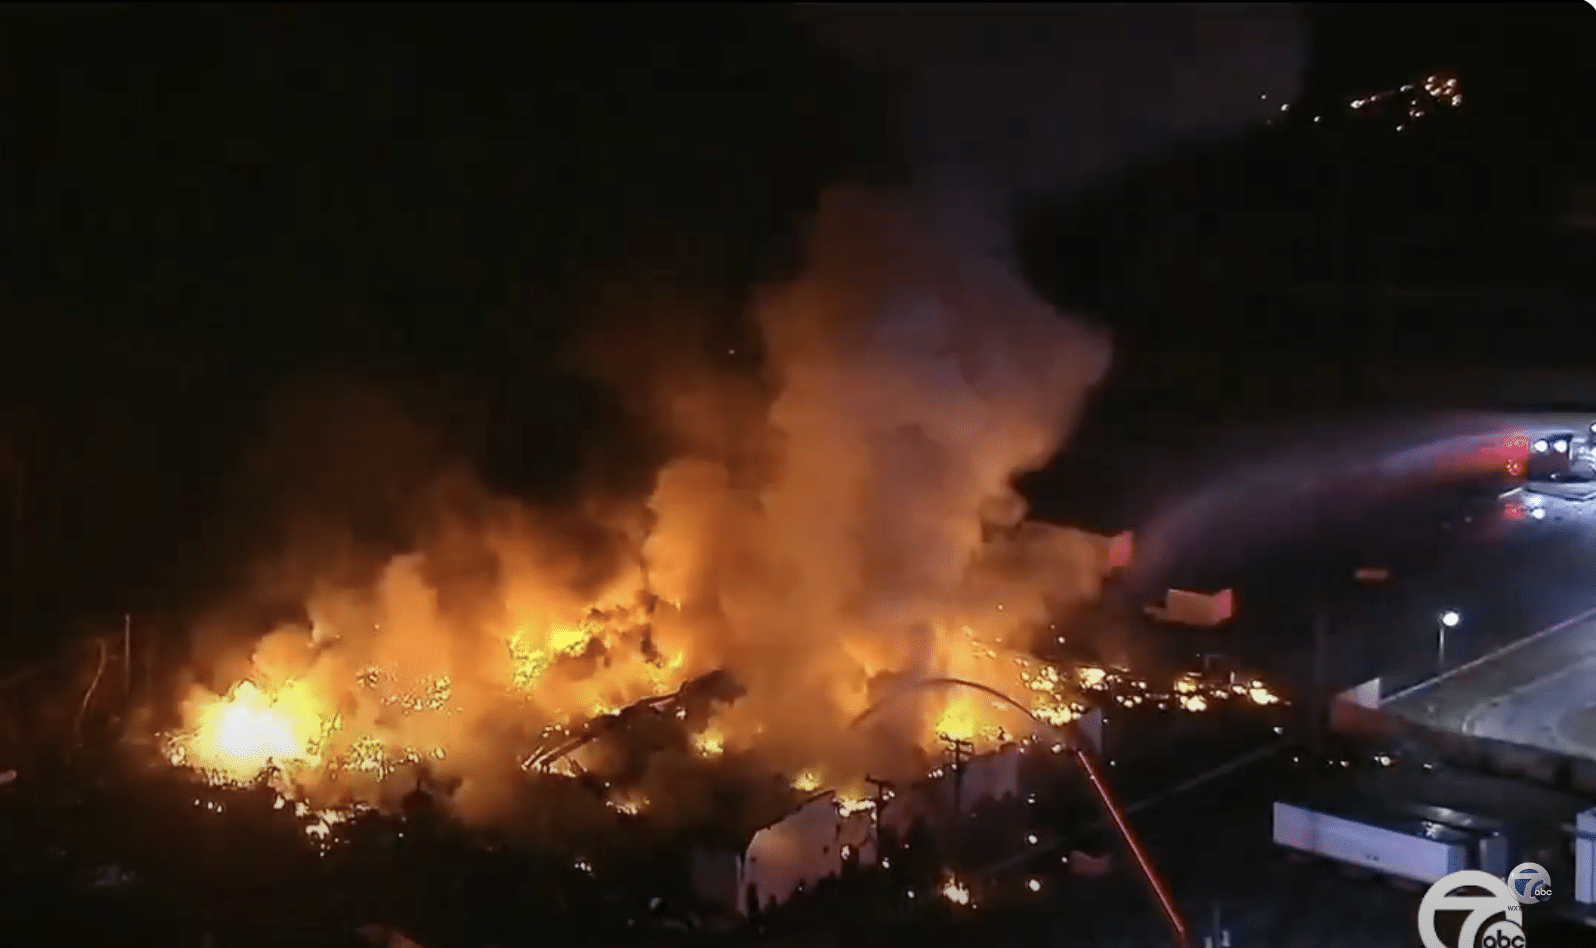 DEVELOPING: Massive industrial fire in Michigan sparks hundreds of explosions killing at least one individual